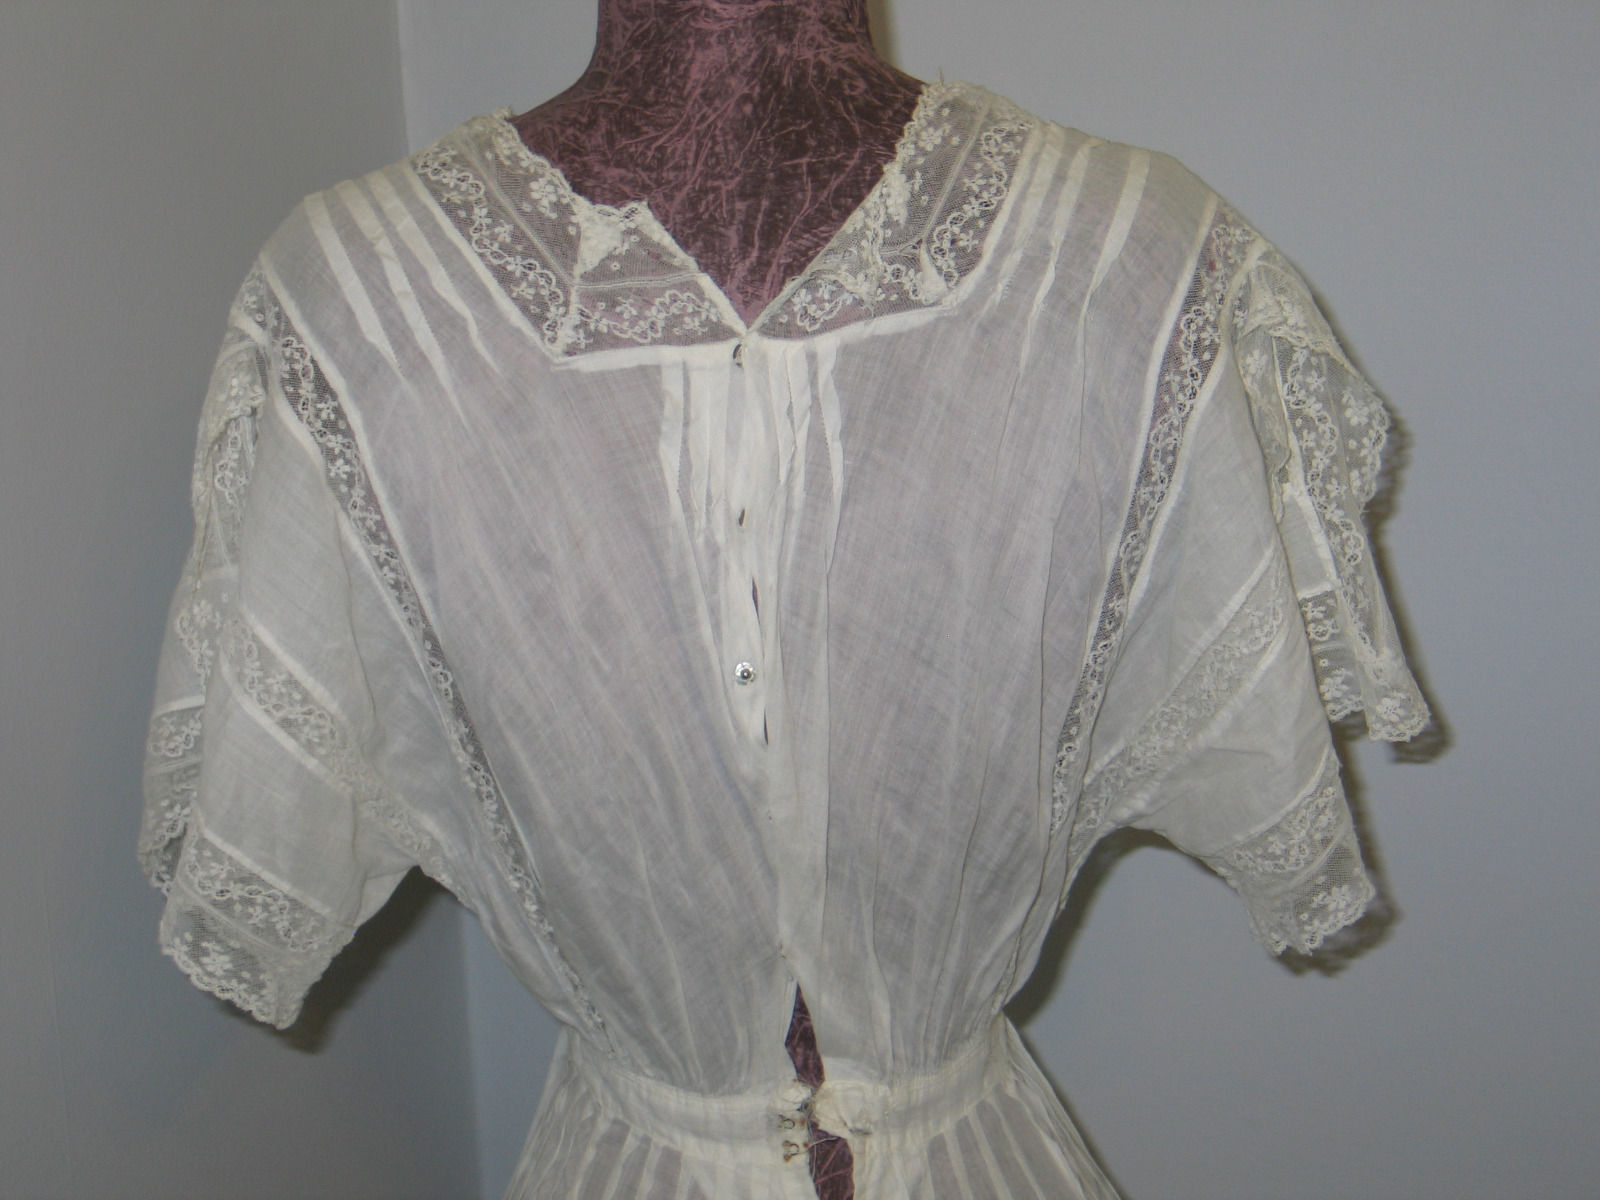 All The Pretty Dresses: Edwardian Summer Overdress